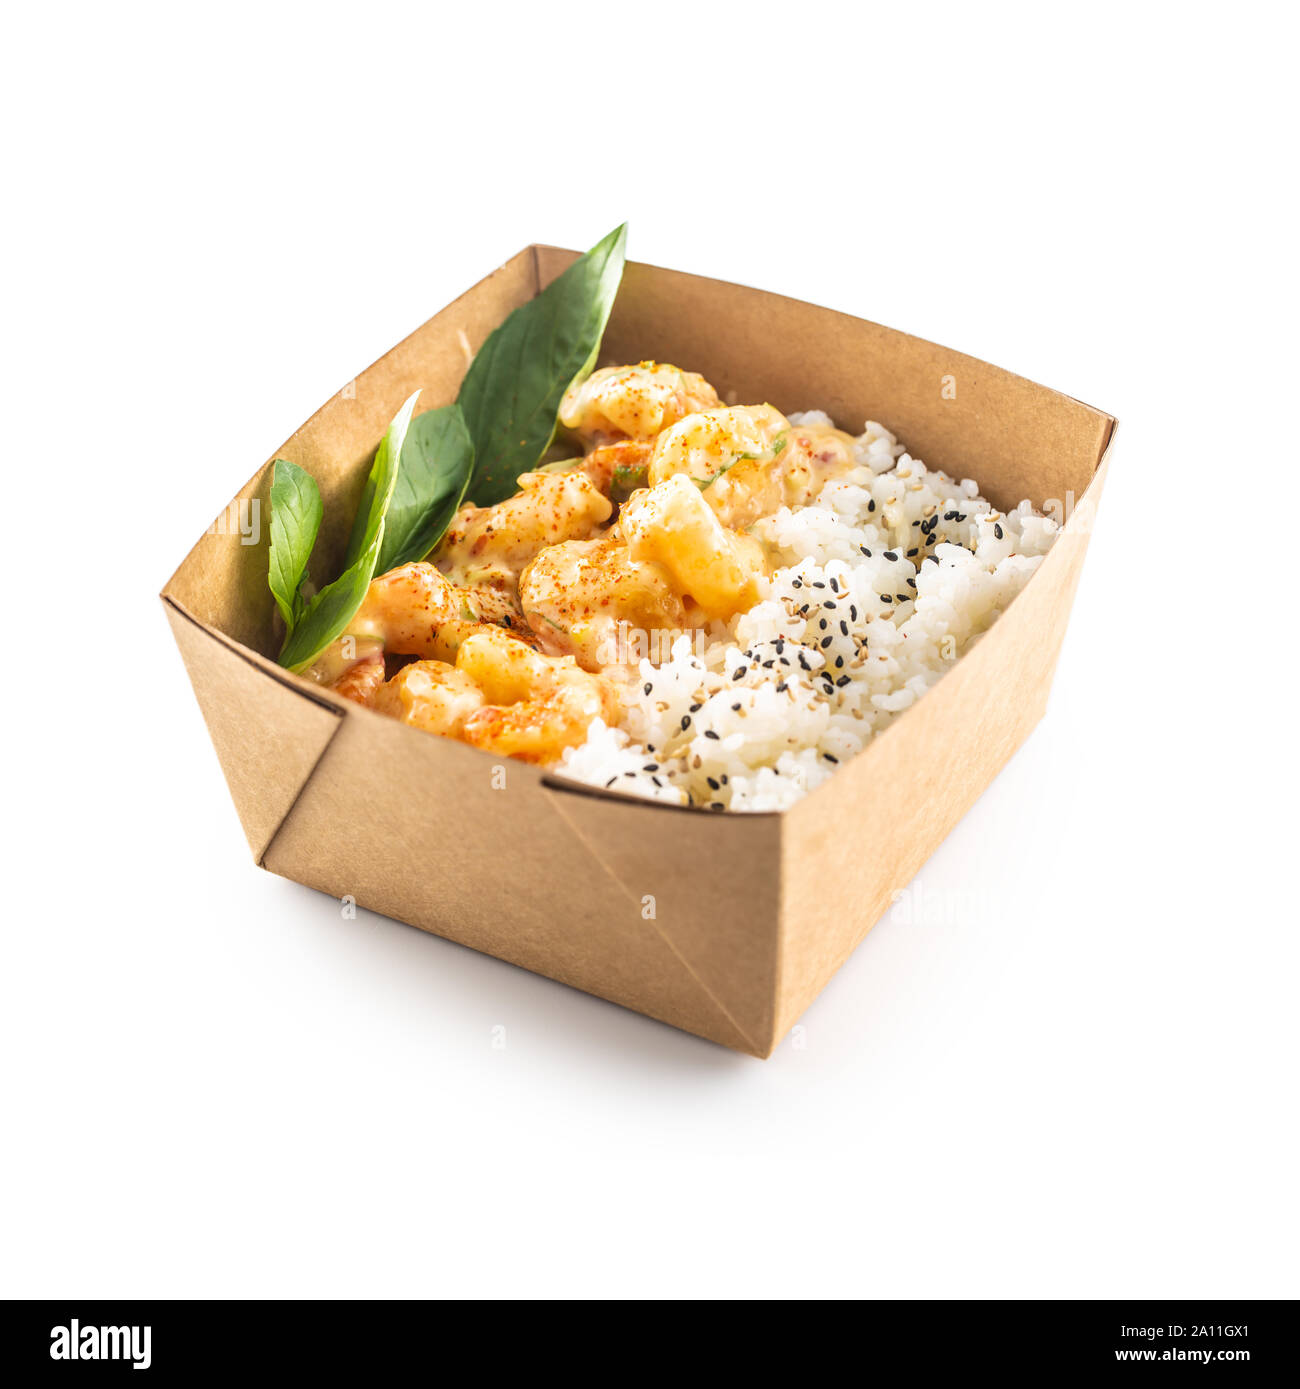 Japanese asian meal in a box of recycled paper isolated on white background  Stock Photo - Alamy